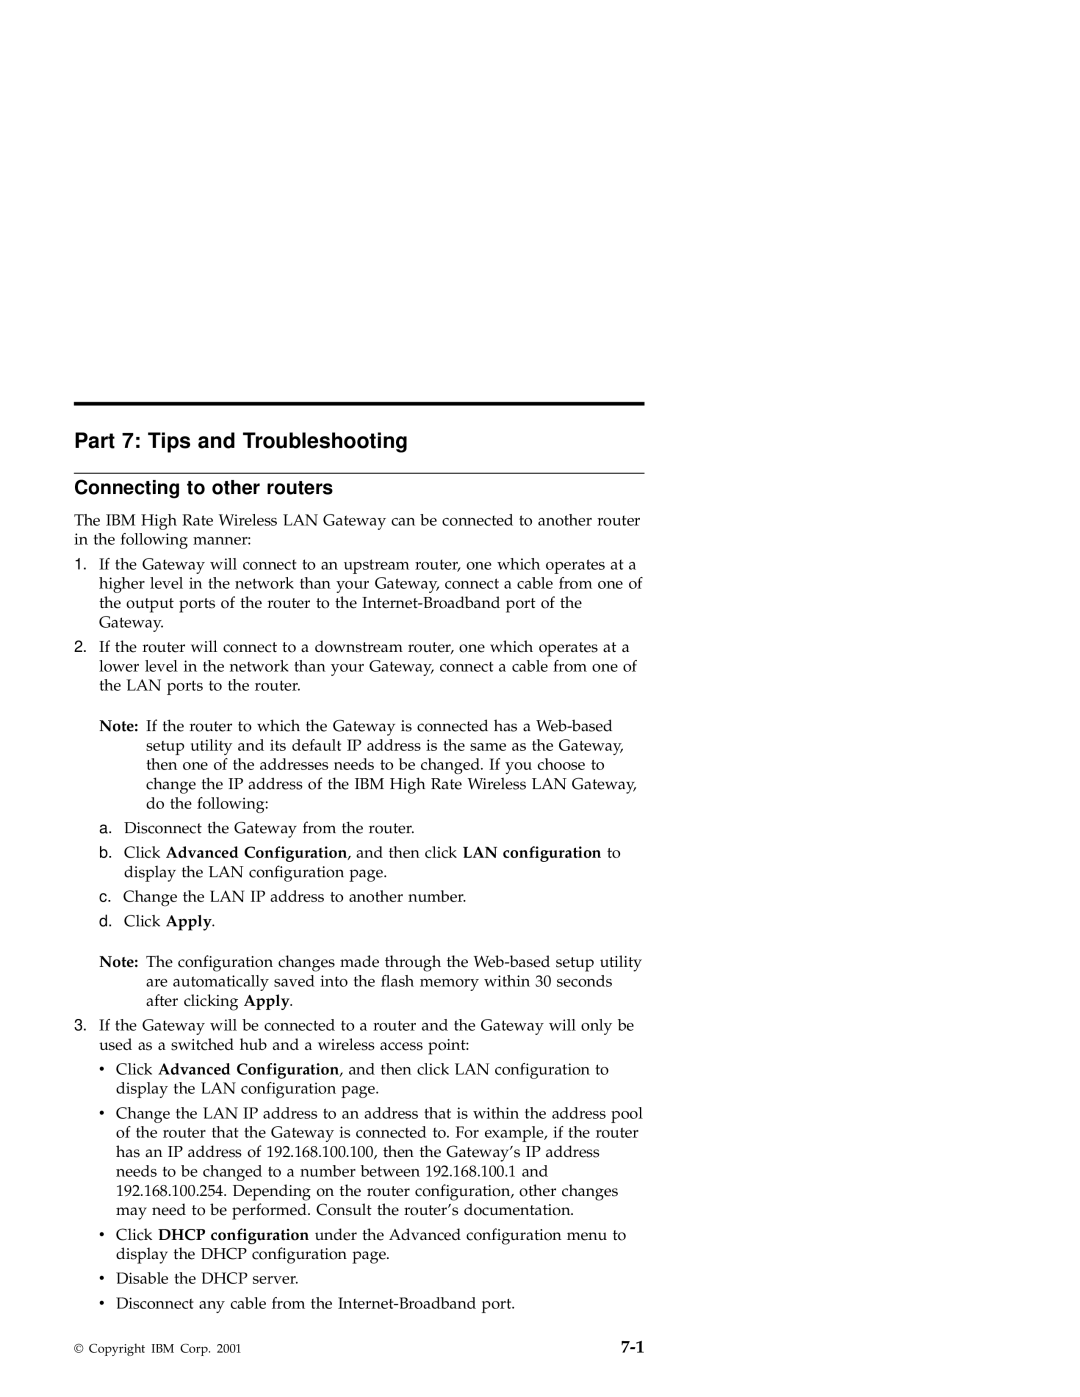 IBM 22P6415 manual Part 7 Tips and Troubleshooting, Connecting to other routers 